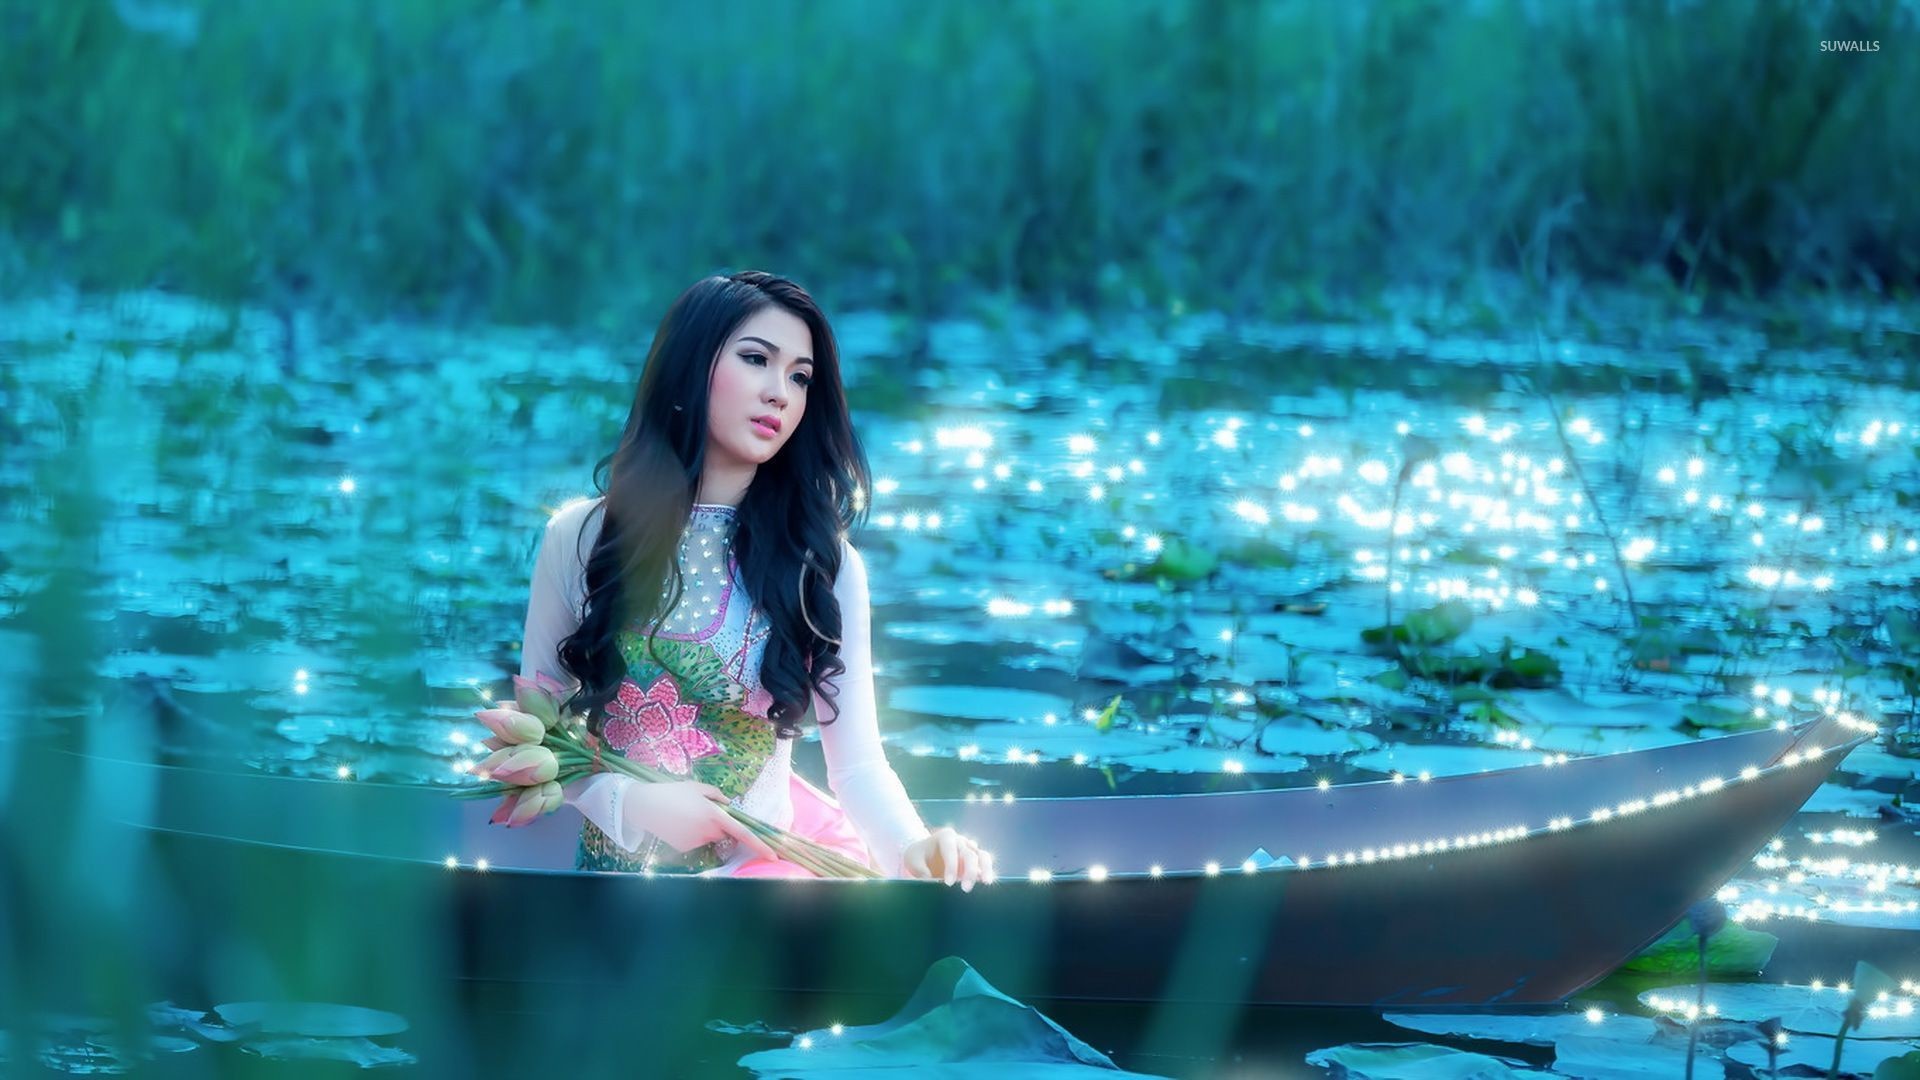 1920x1080 Girl with flowers sitting in the boat wallpaper